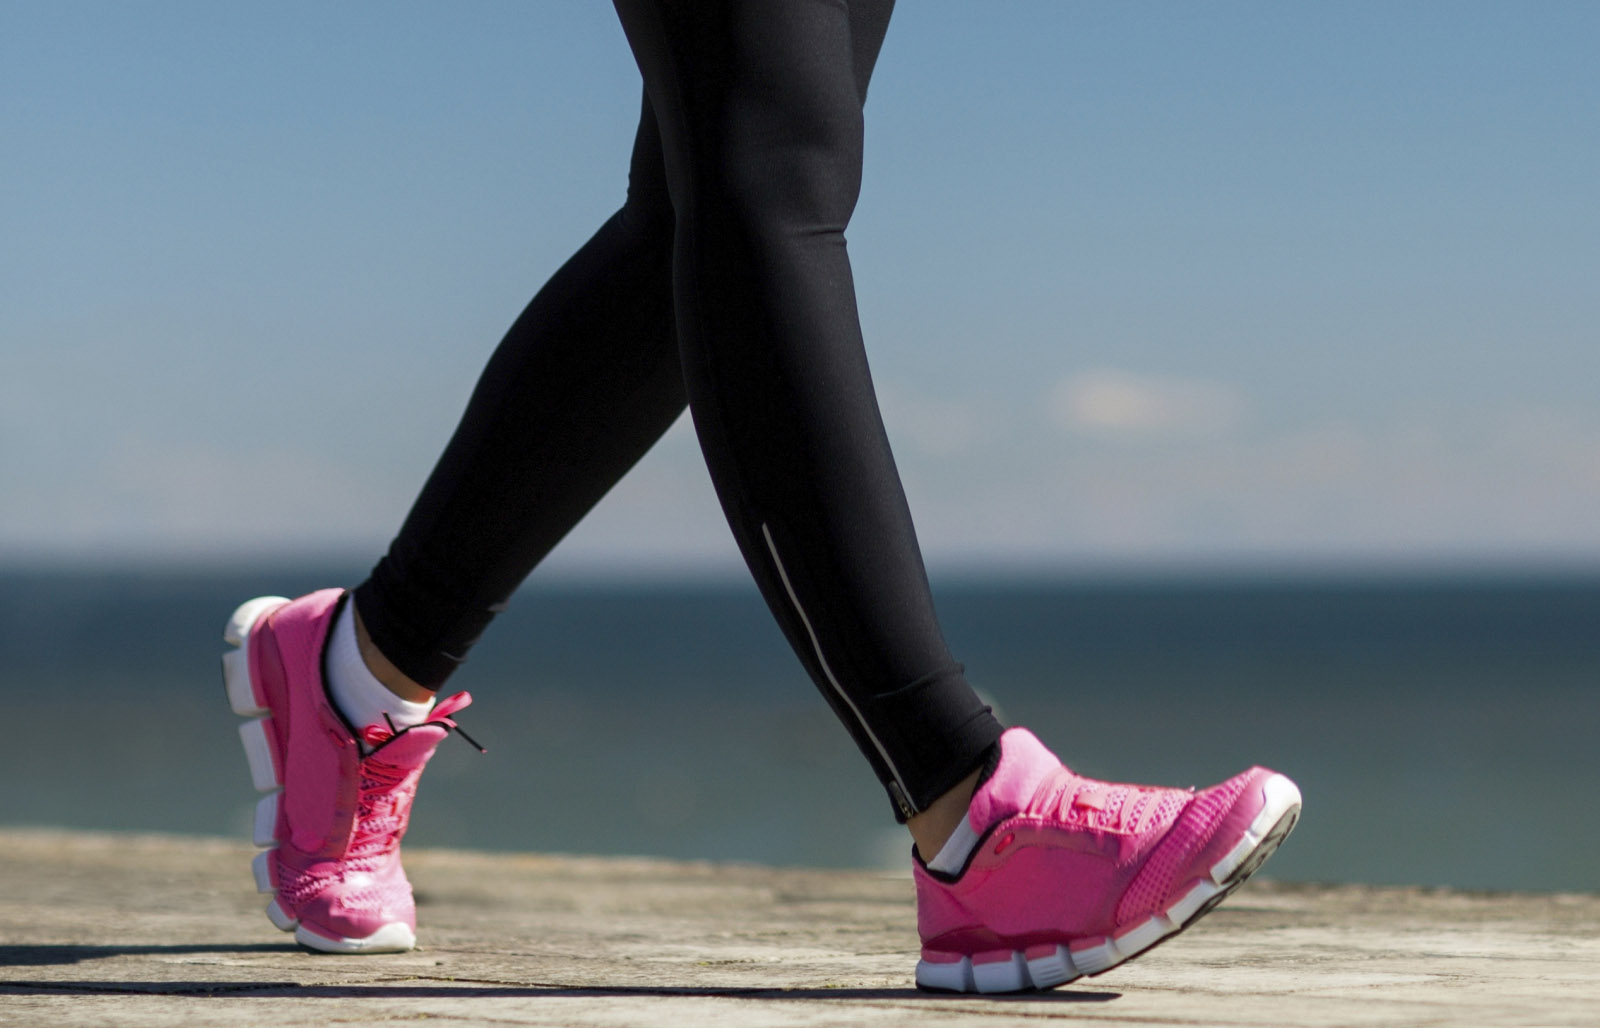 Want to protect your knees? A study says losing weight could be your best bet. (Getty Images/iStockphoto/dolgachov)